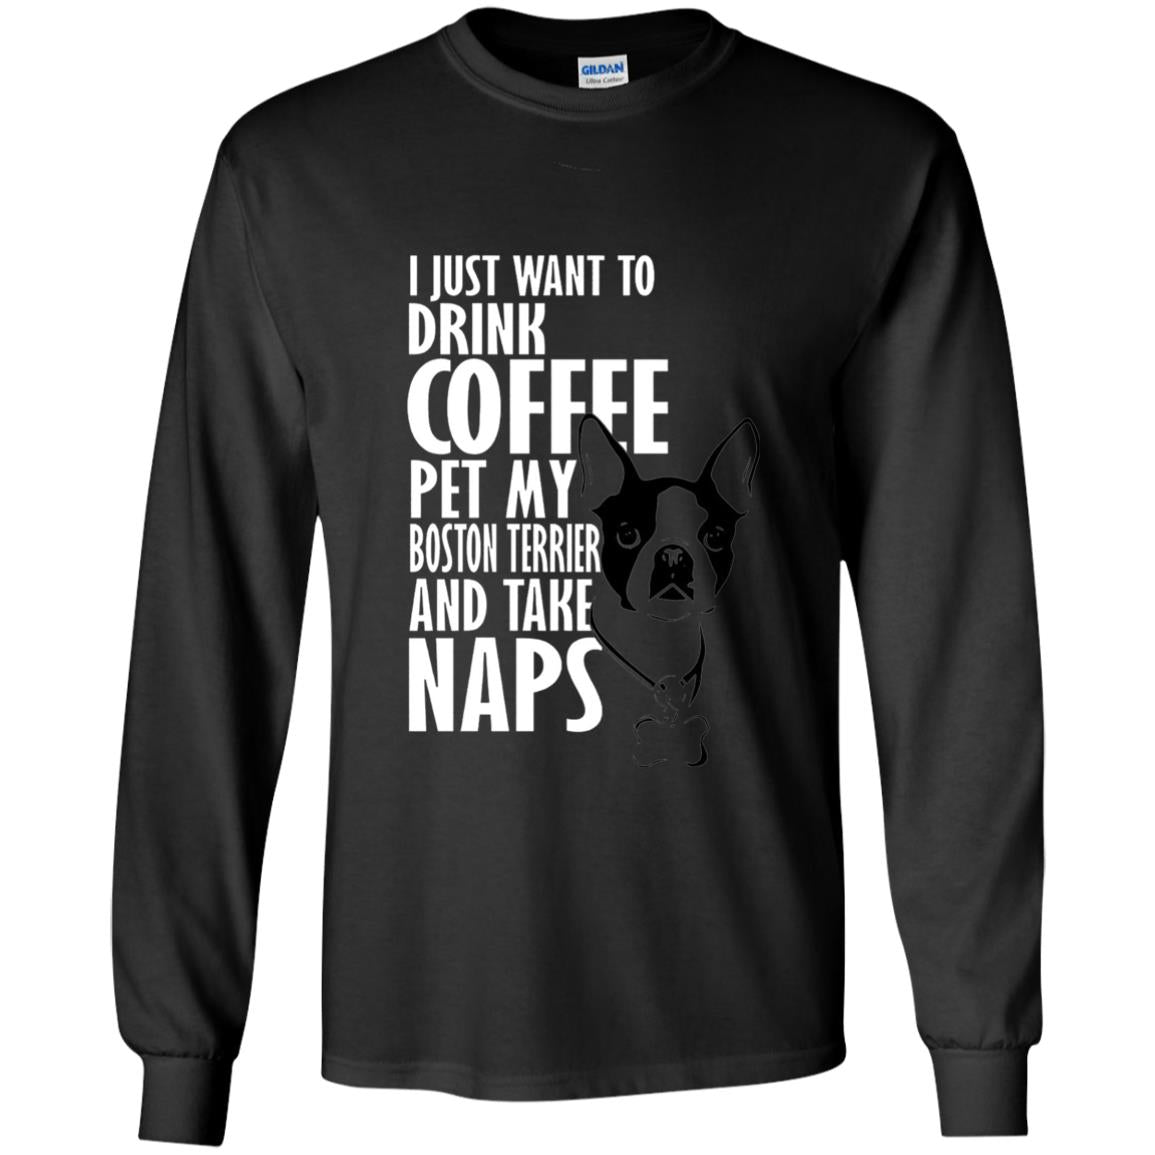 I Just Want To Drink Coffee Pet My Boston Terrier And Take Naps Dog And Cofffee Lover T-shirt